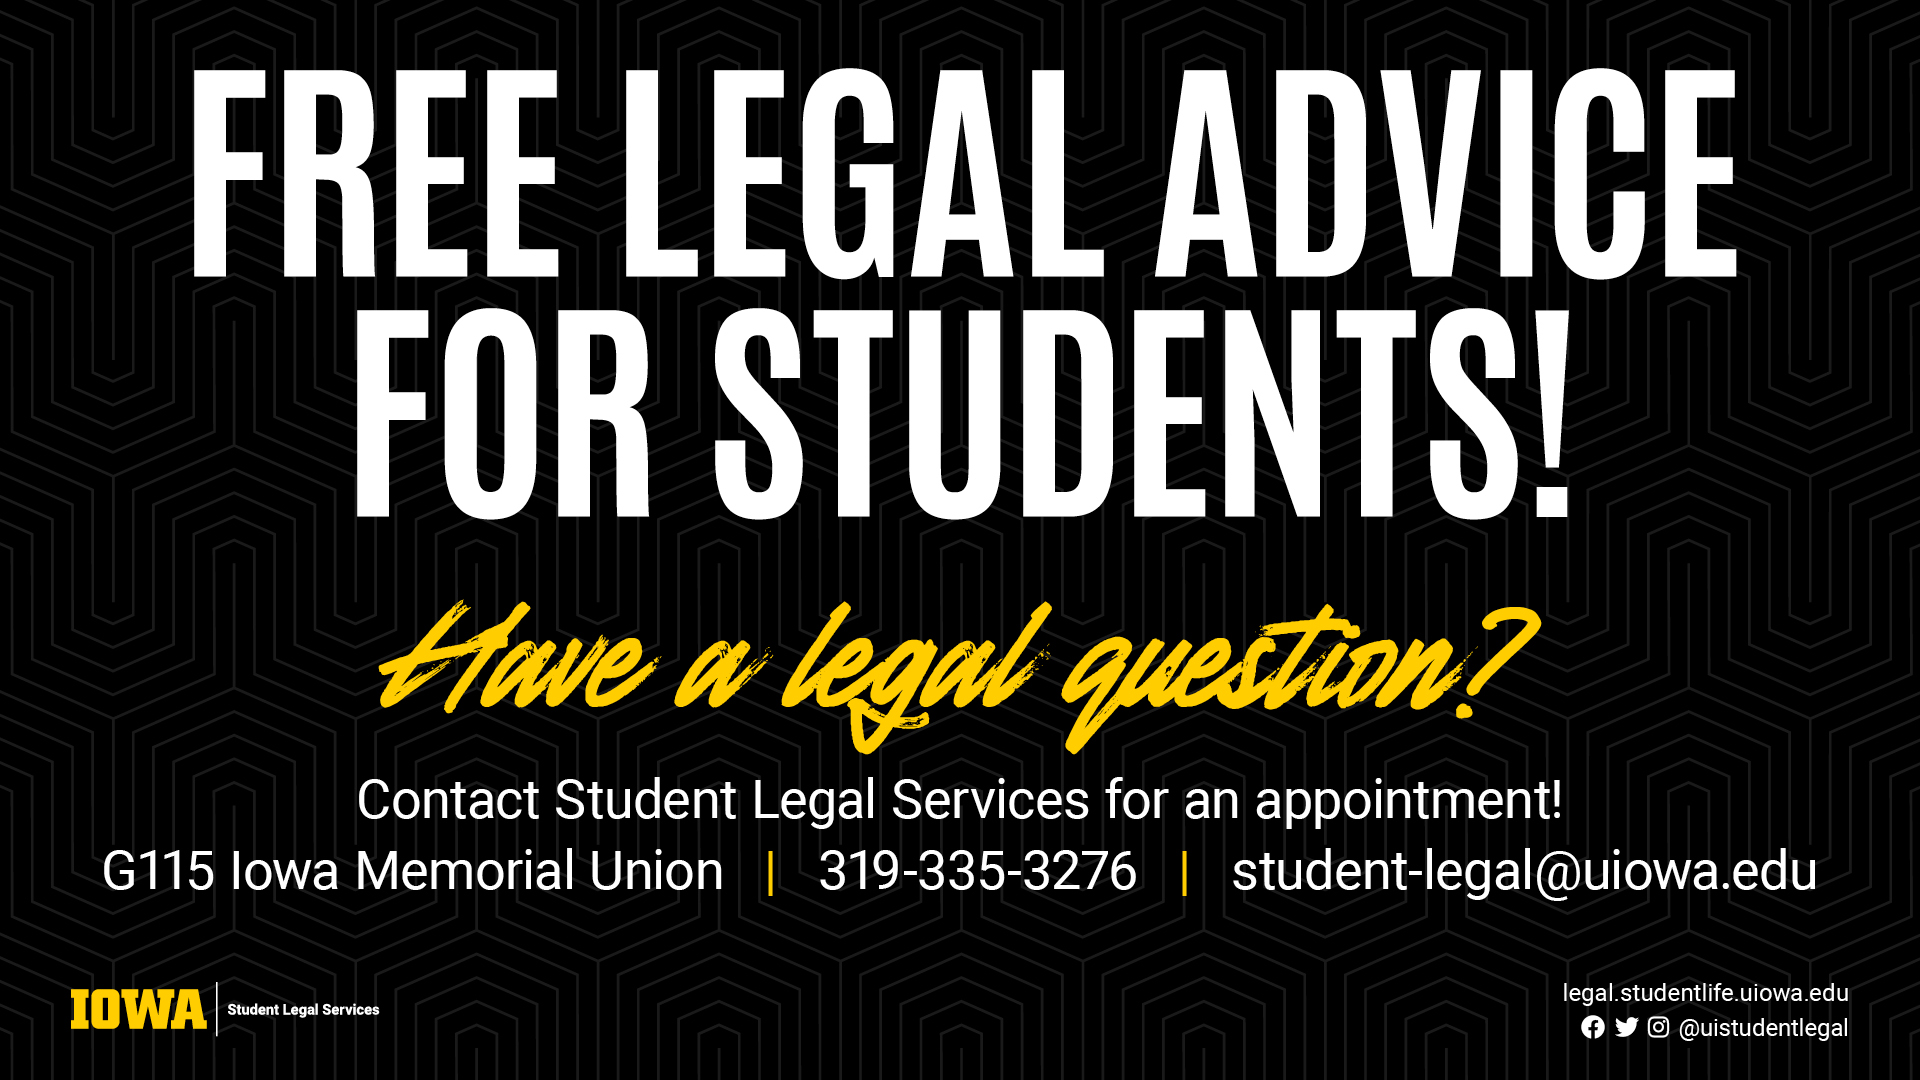 Free legal advice for students from student legal services